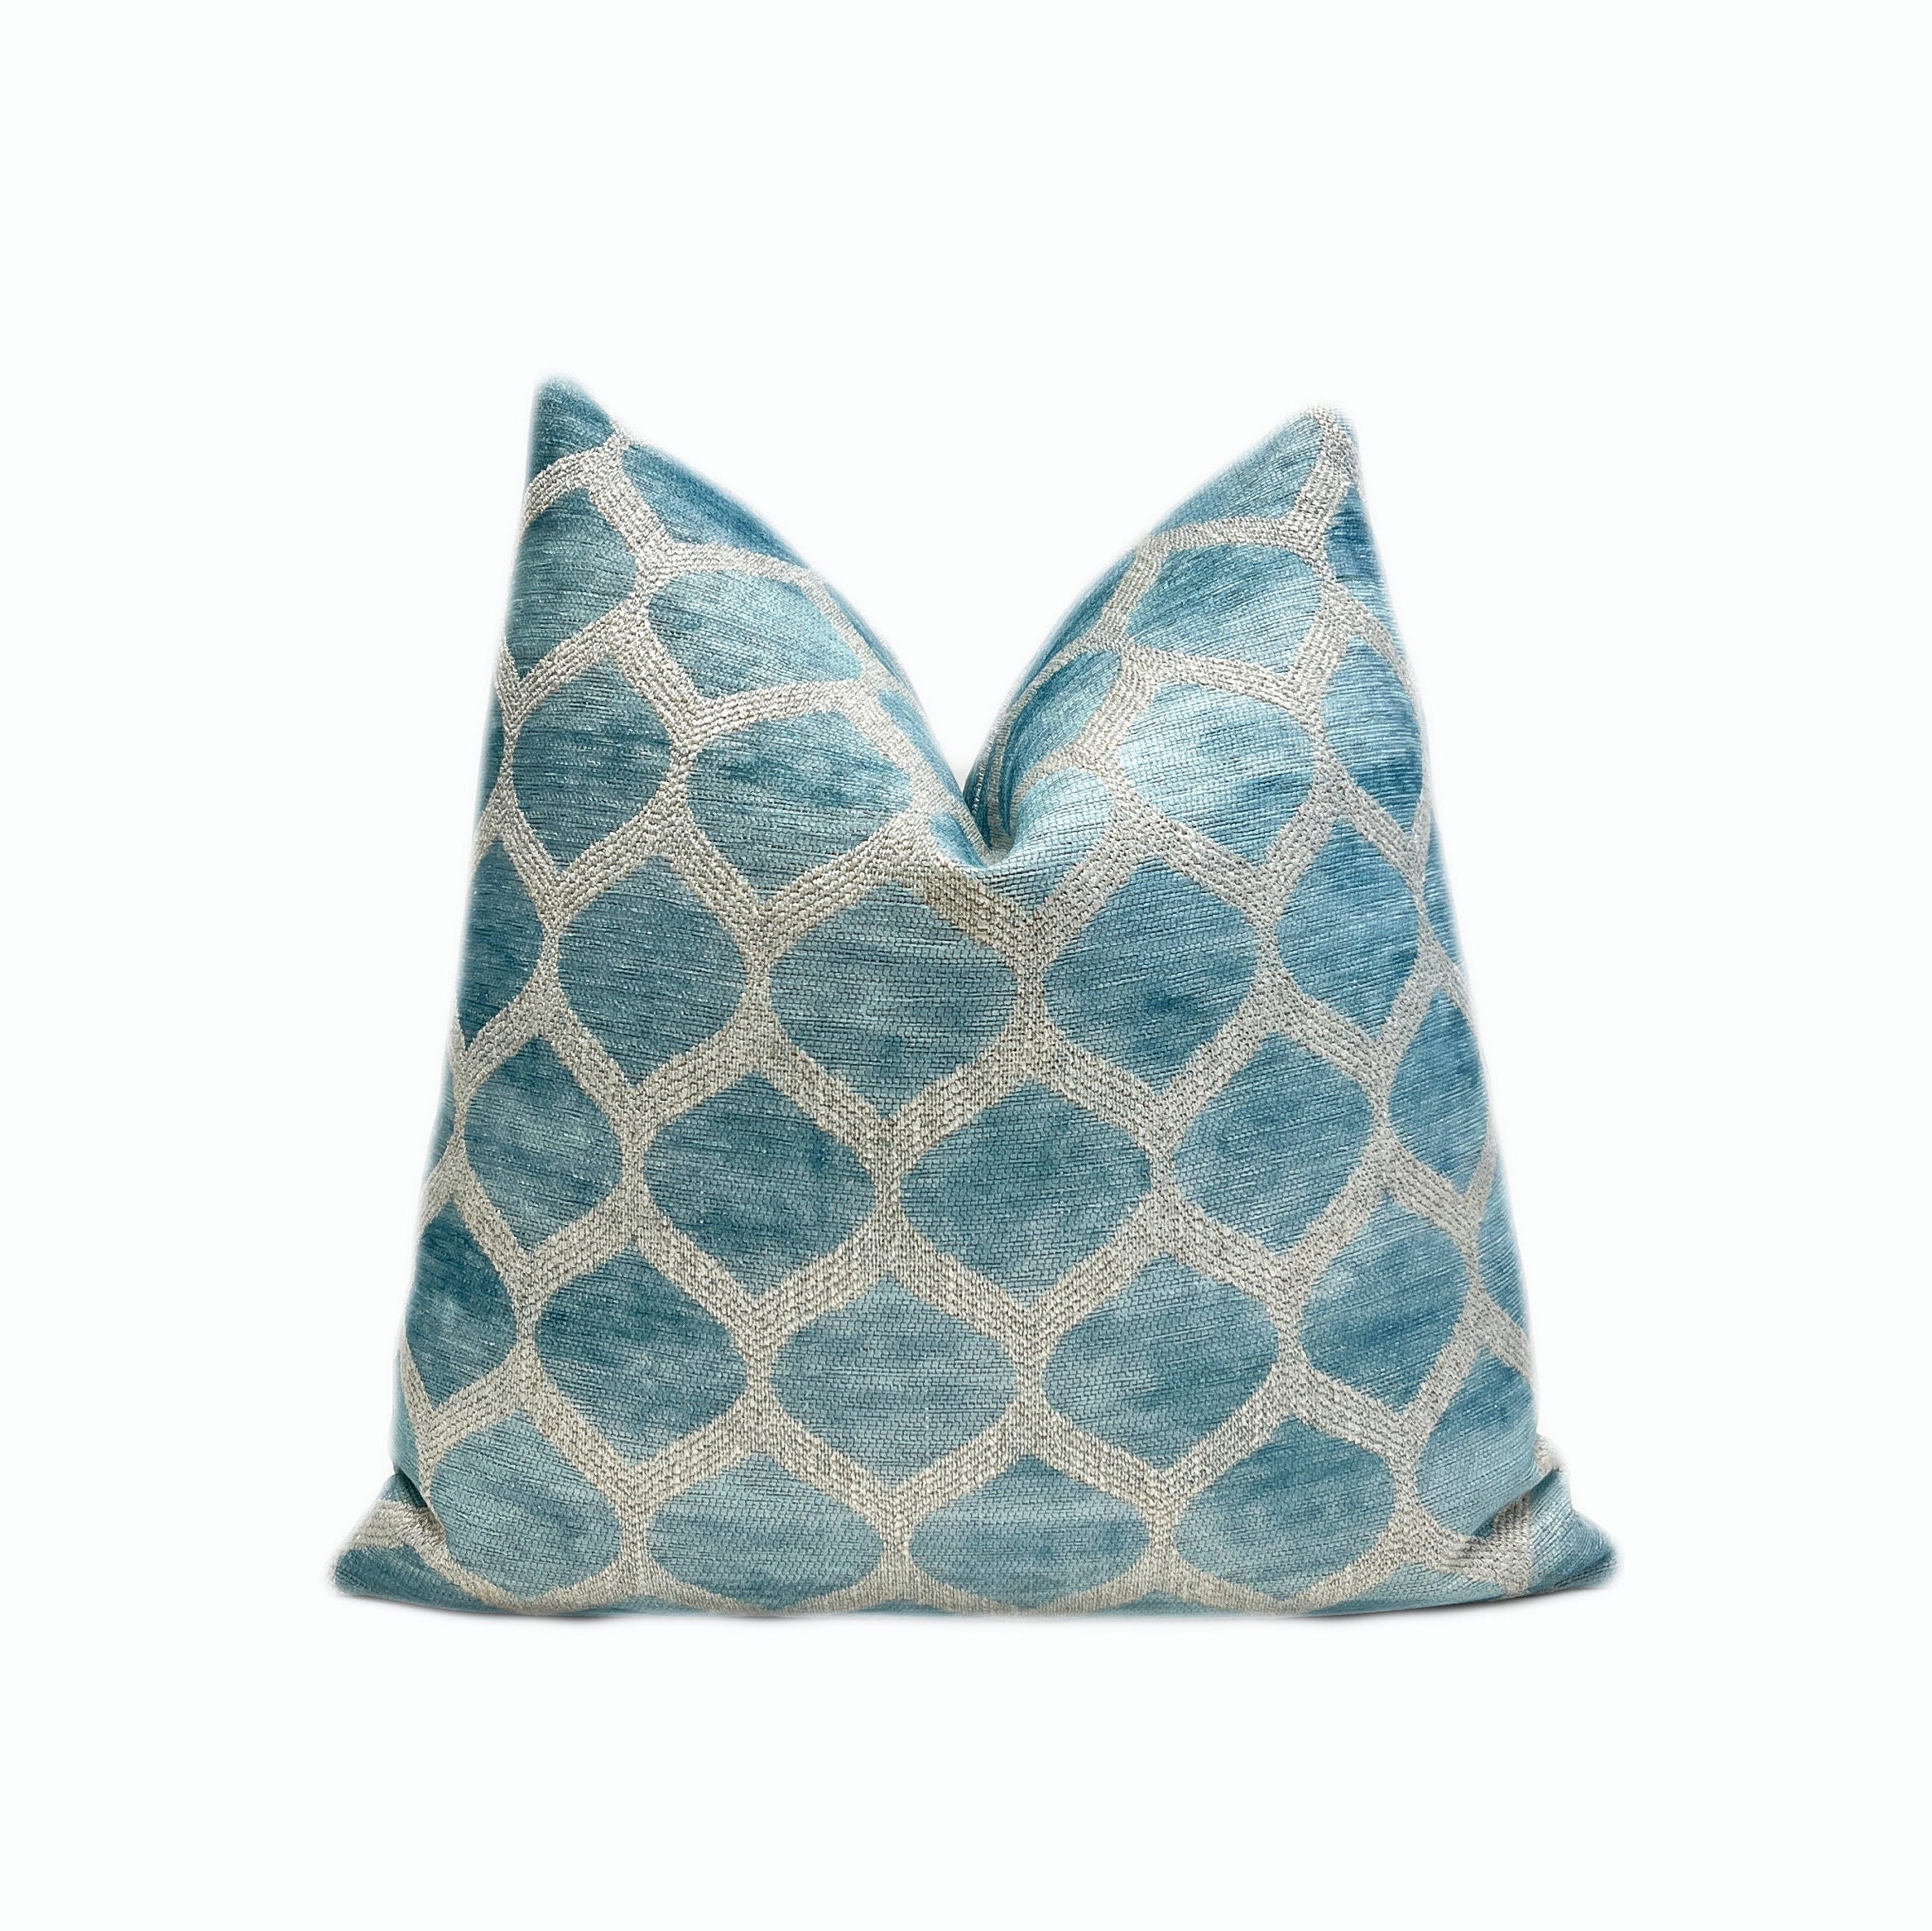 FUTEI Turquoise Linen Decorative Throw Pillow Covers 18x18 Inch